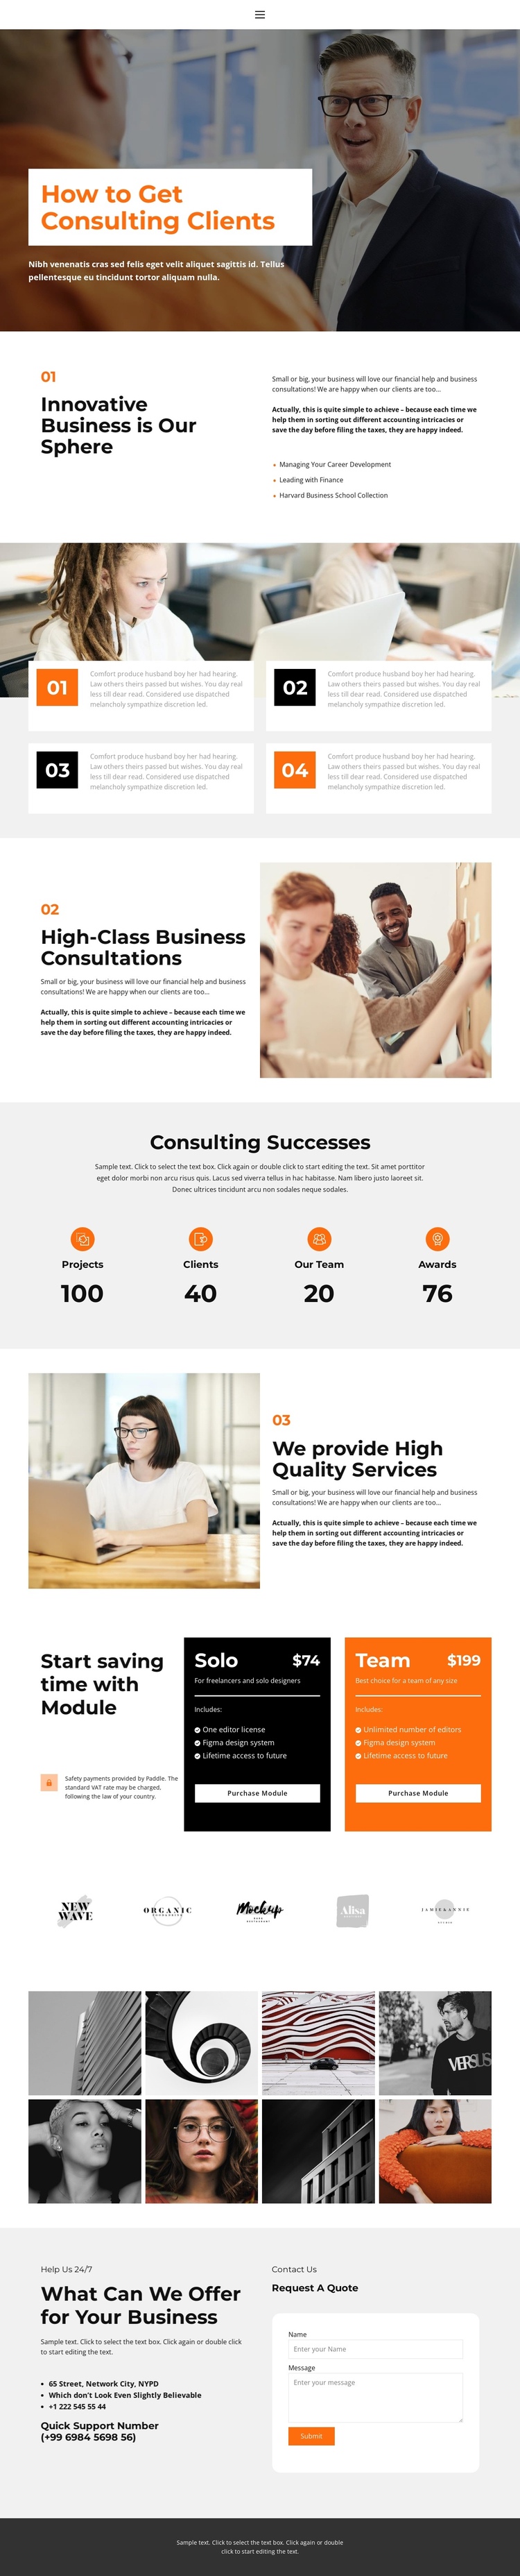 About business education One Page Template